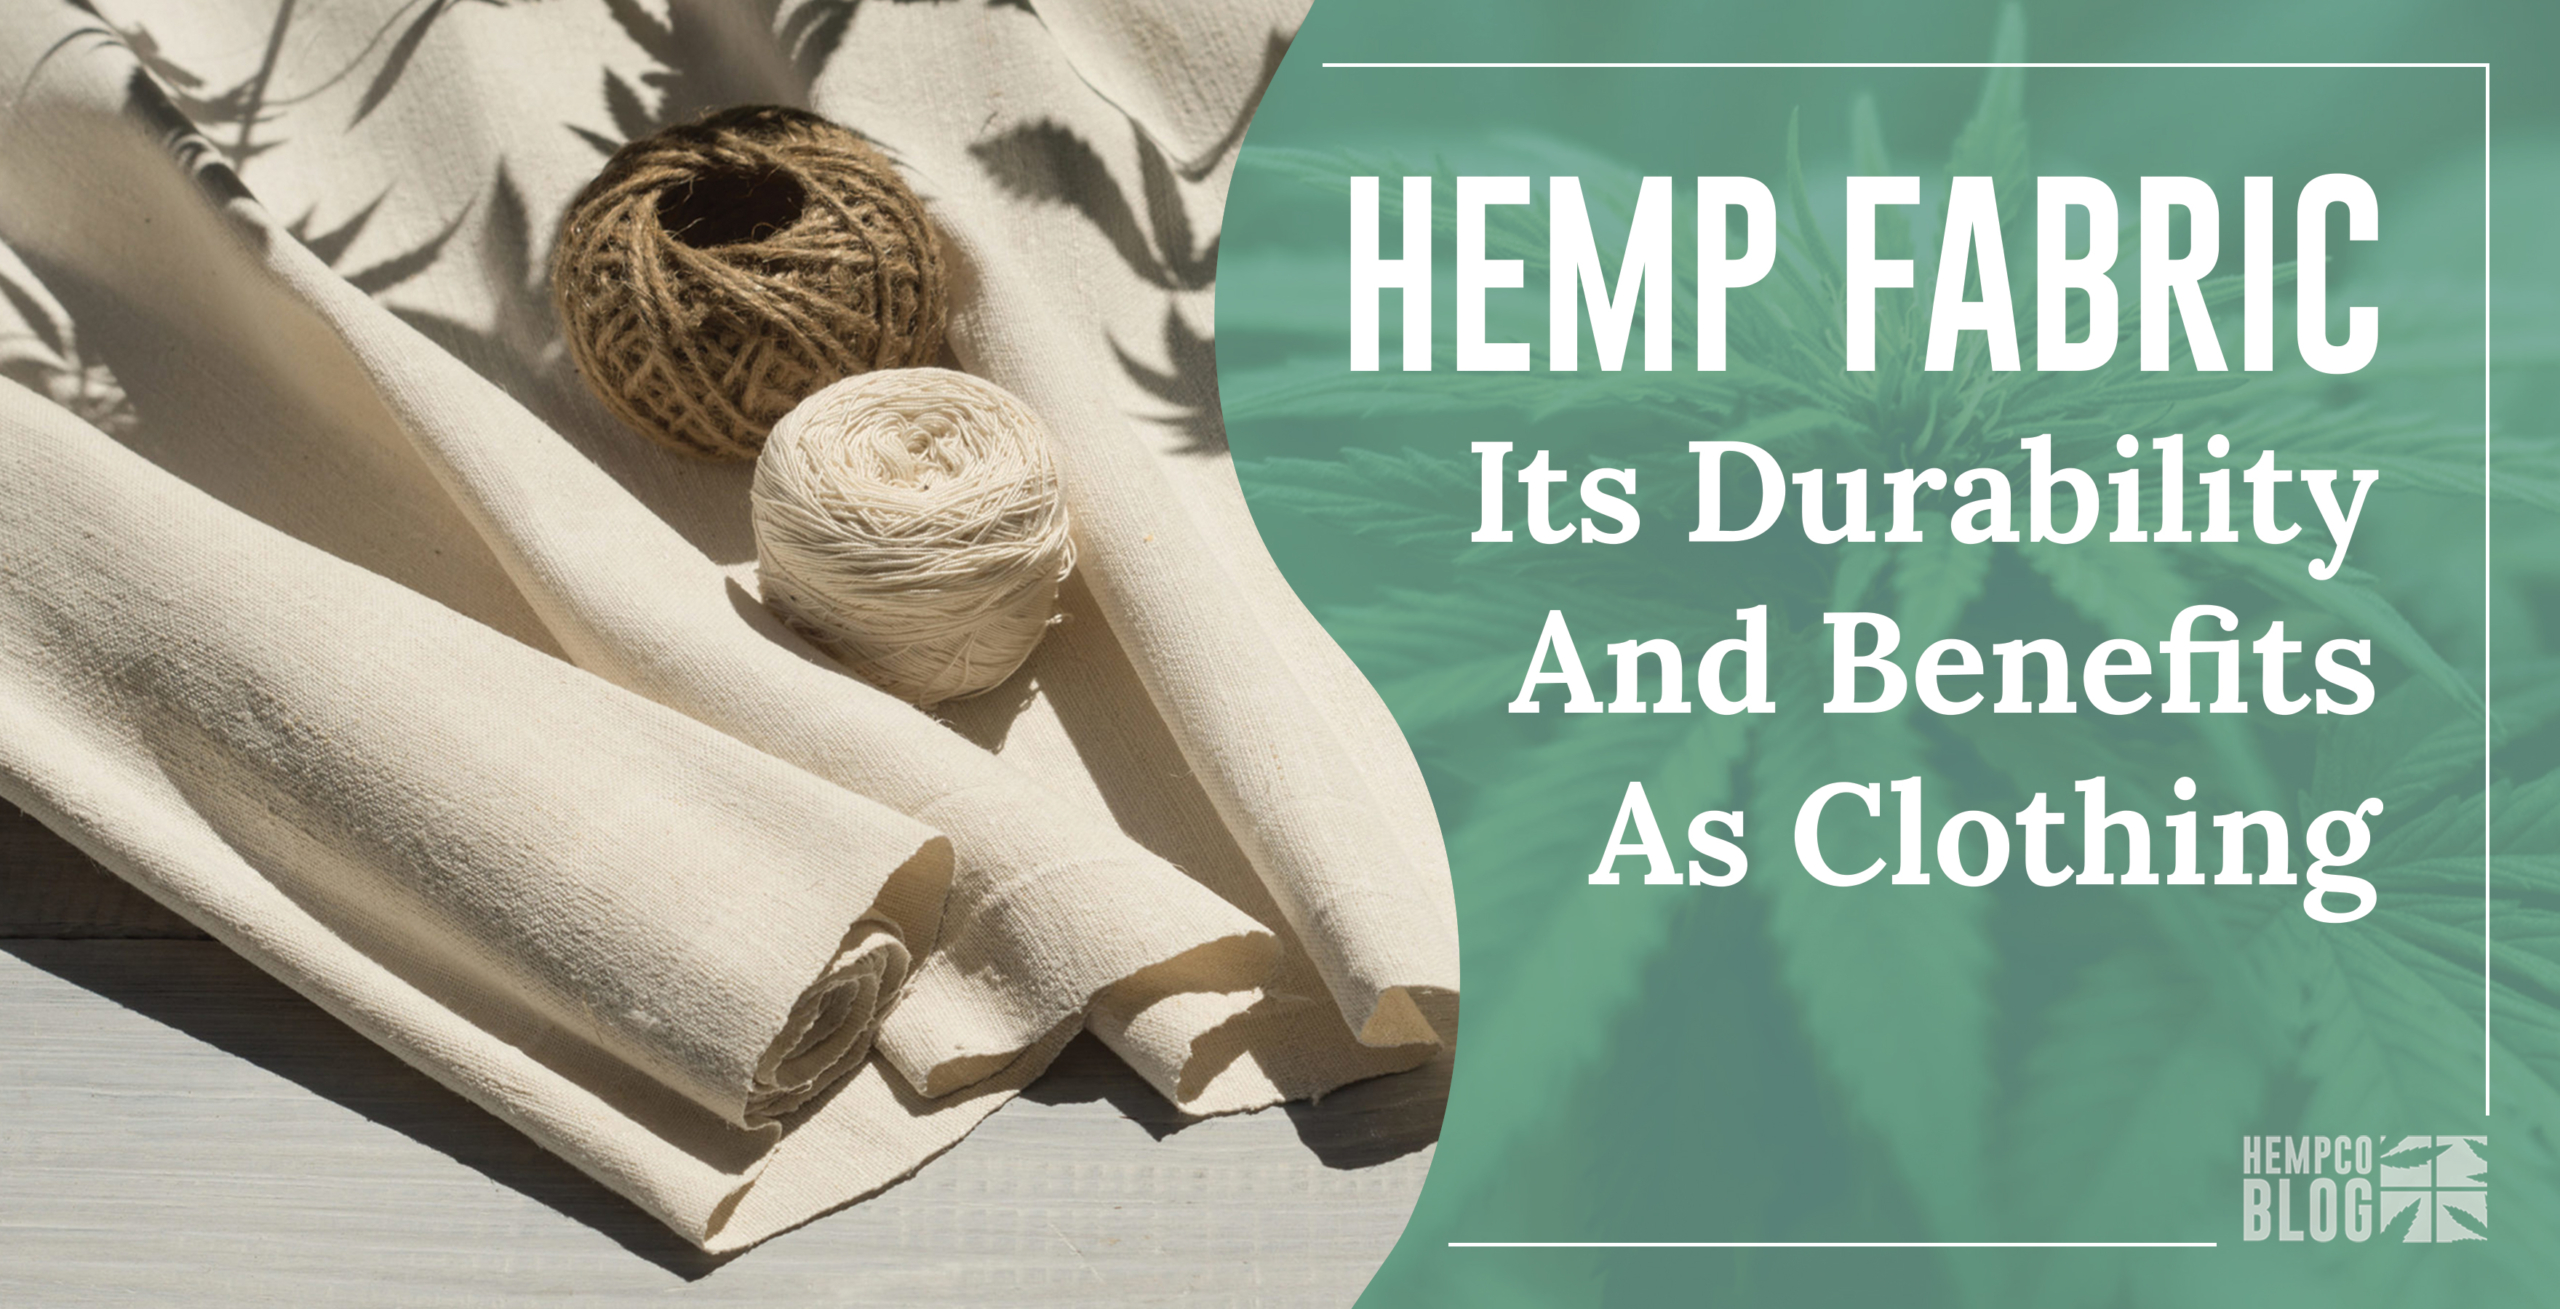 Hemp Fabric - Its Durability And Benefits As Clothing